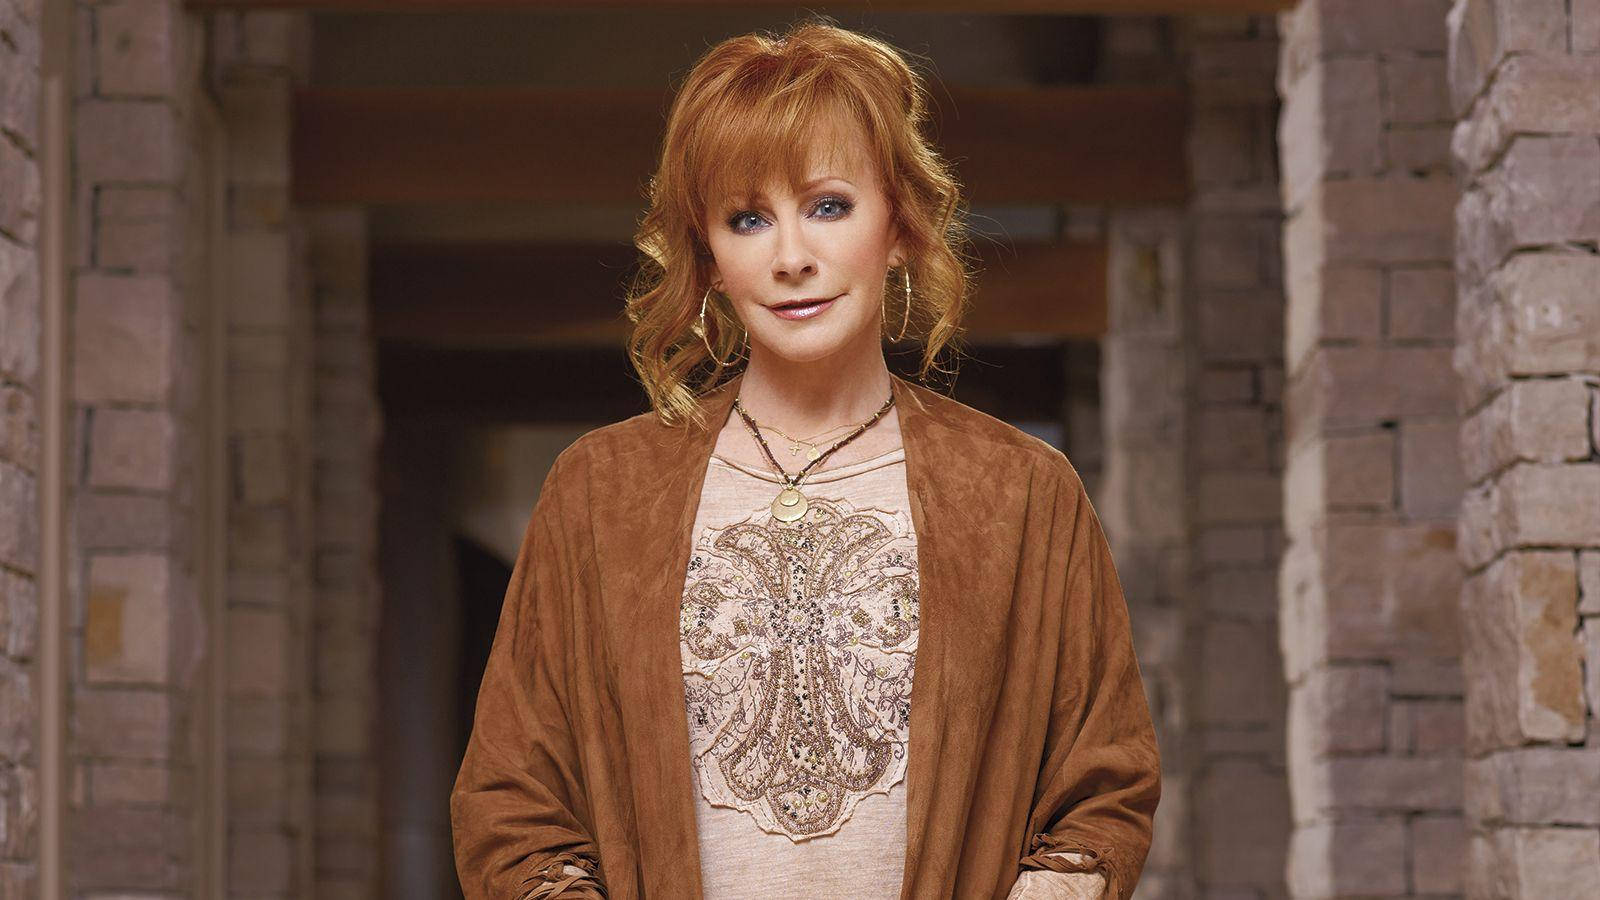 Caption: Reba Mcentire: Queen of Country Music Wallpaper